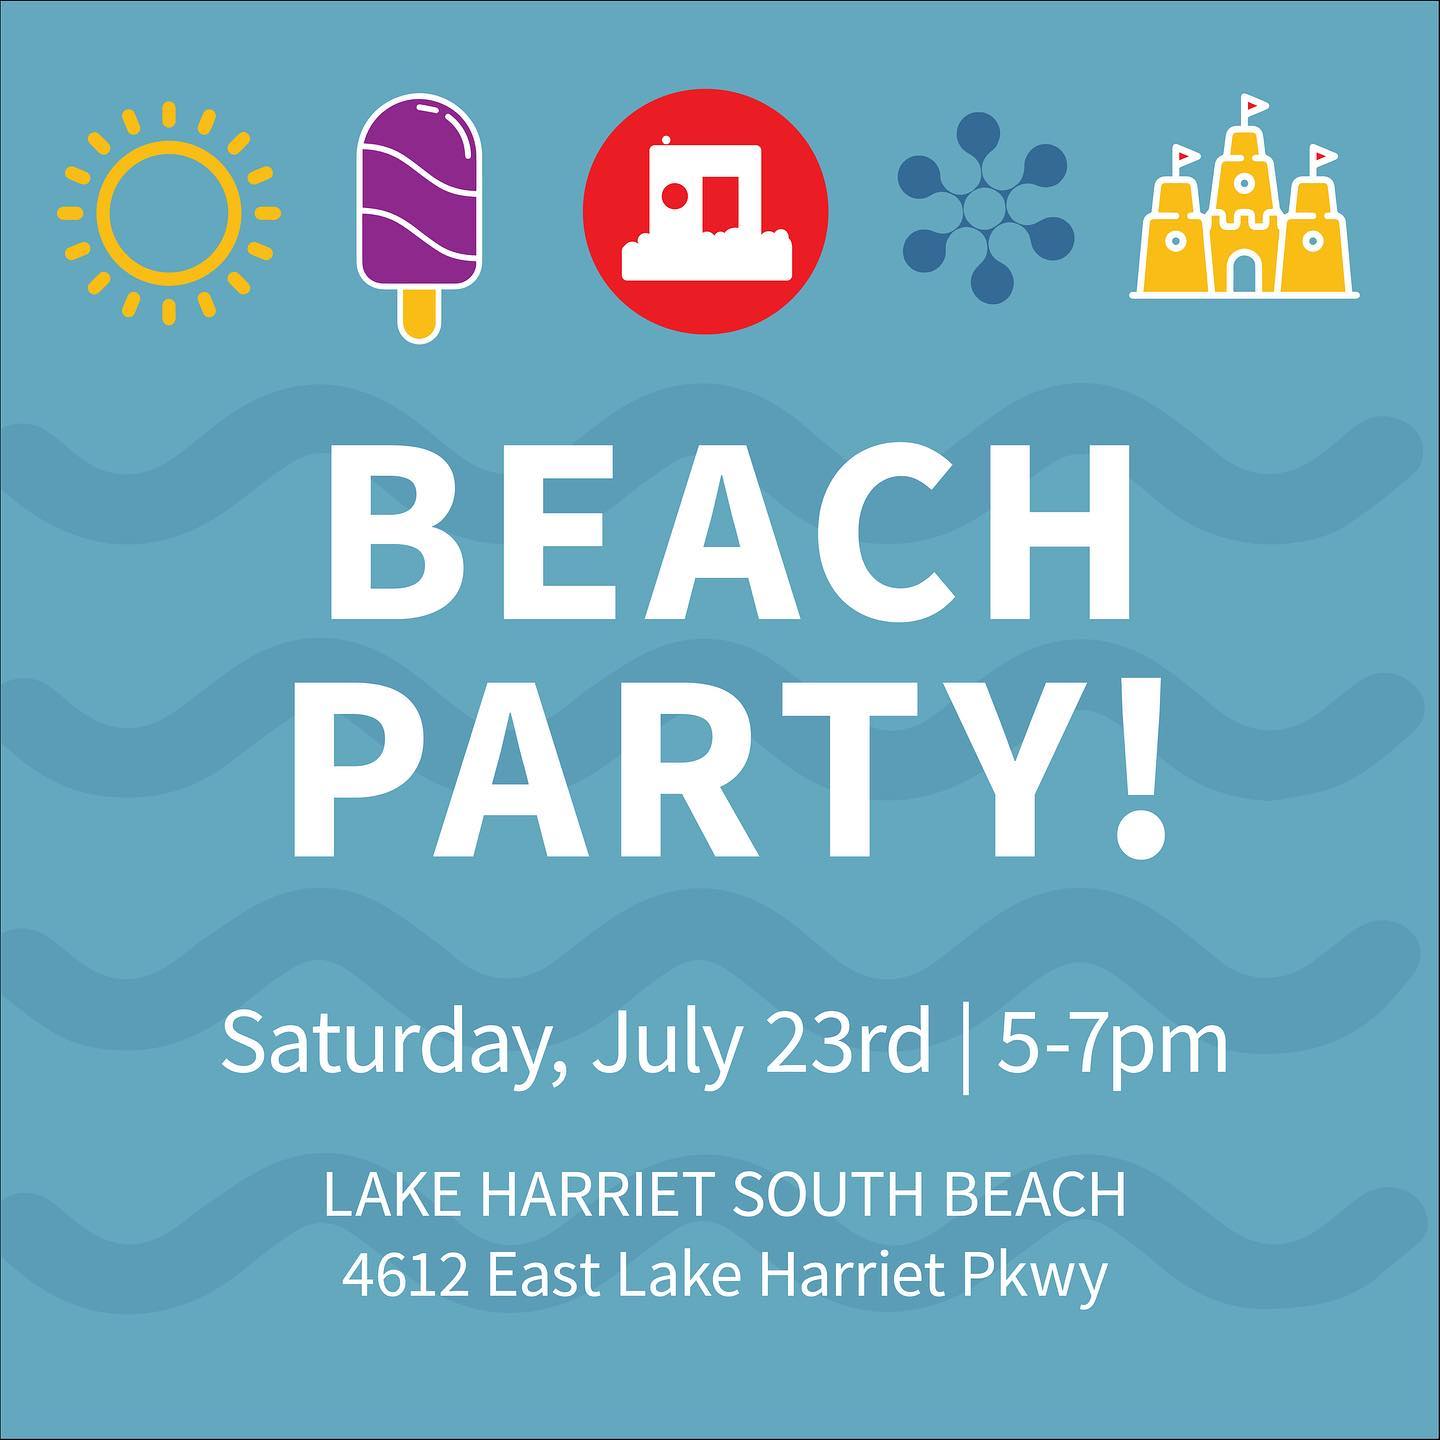 summer icons sit above the words 'beach party! saturday, july 23, 5-7pm at Lake Harriet South Beach"